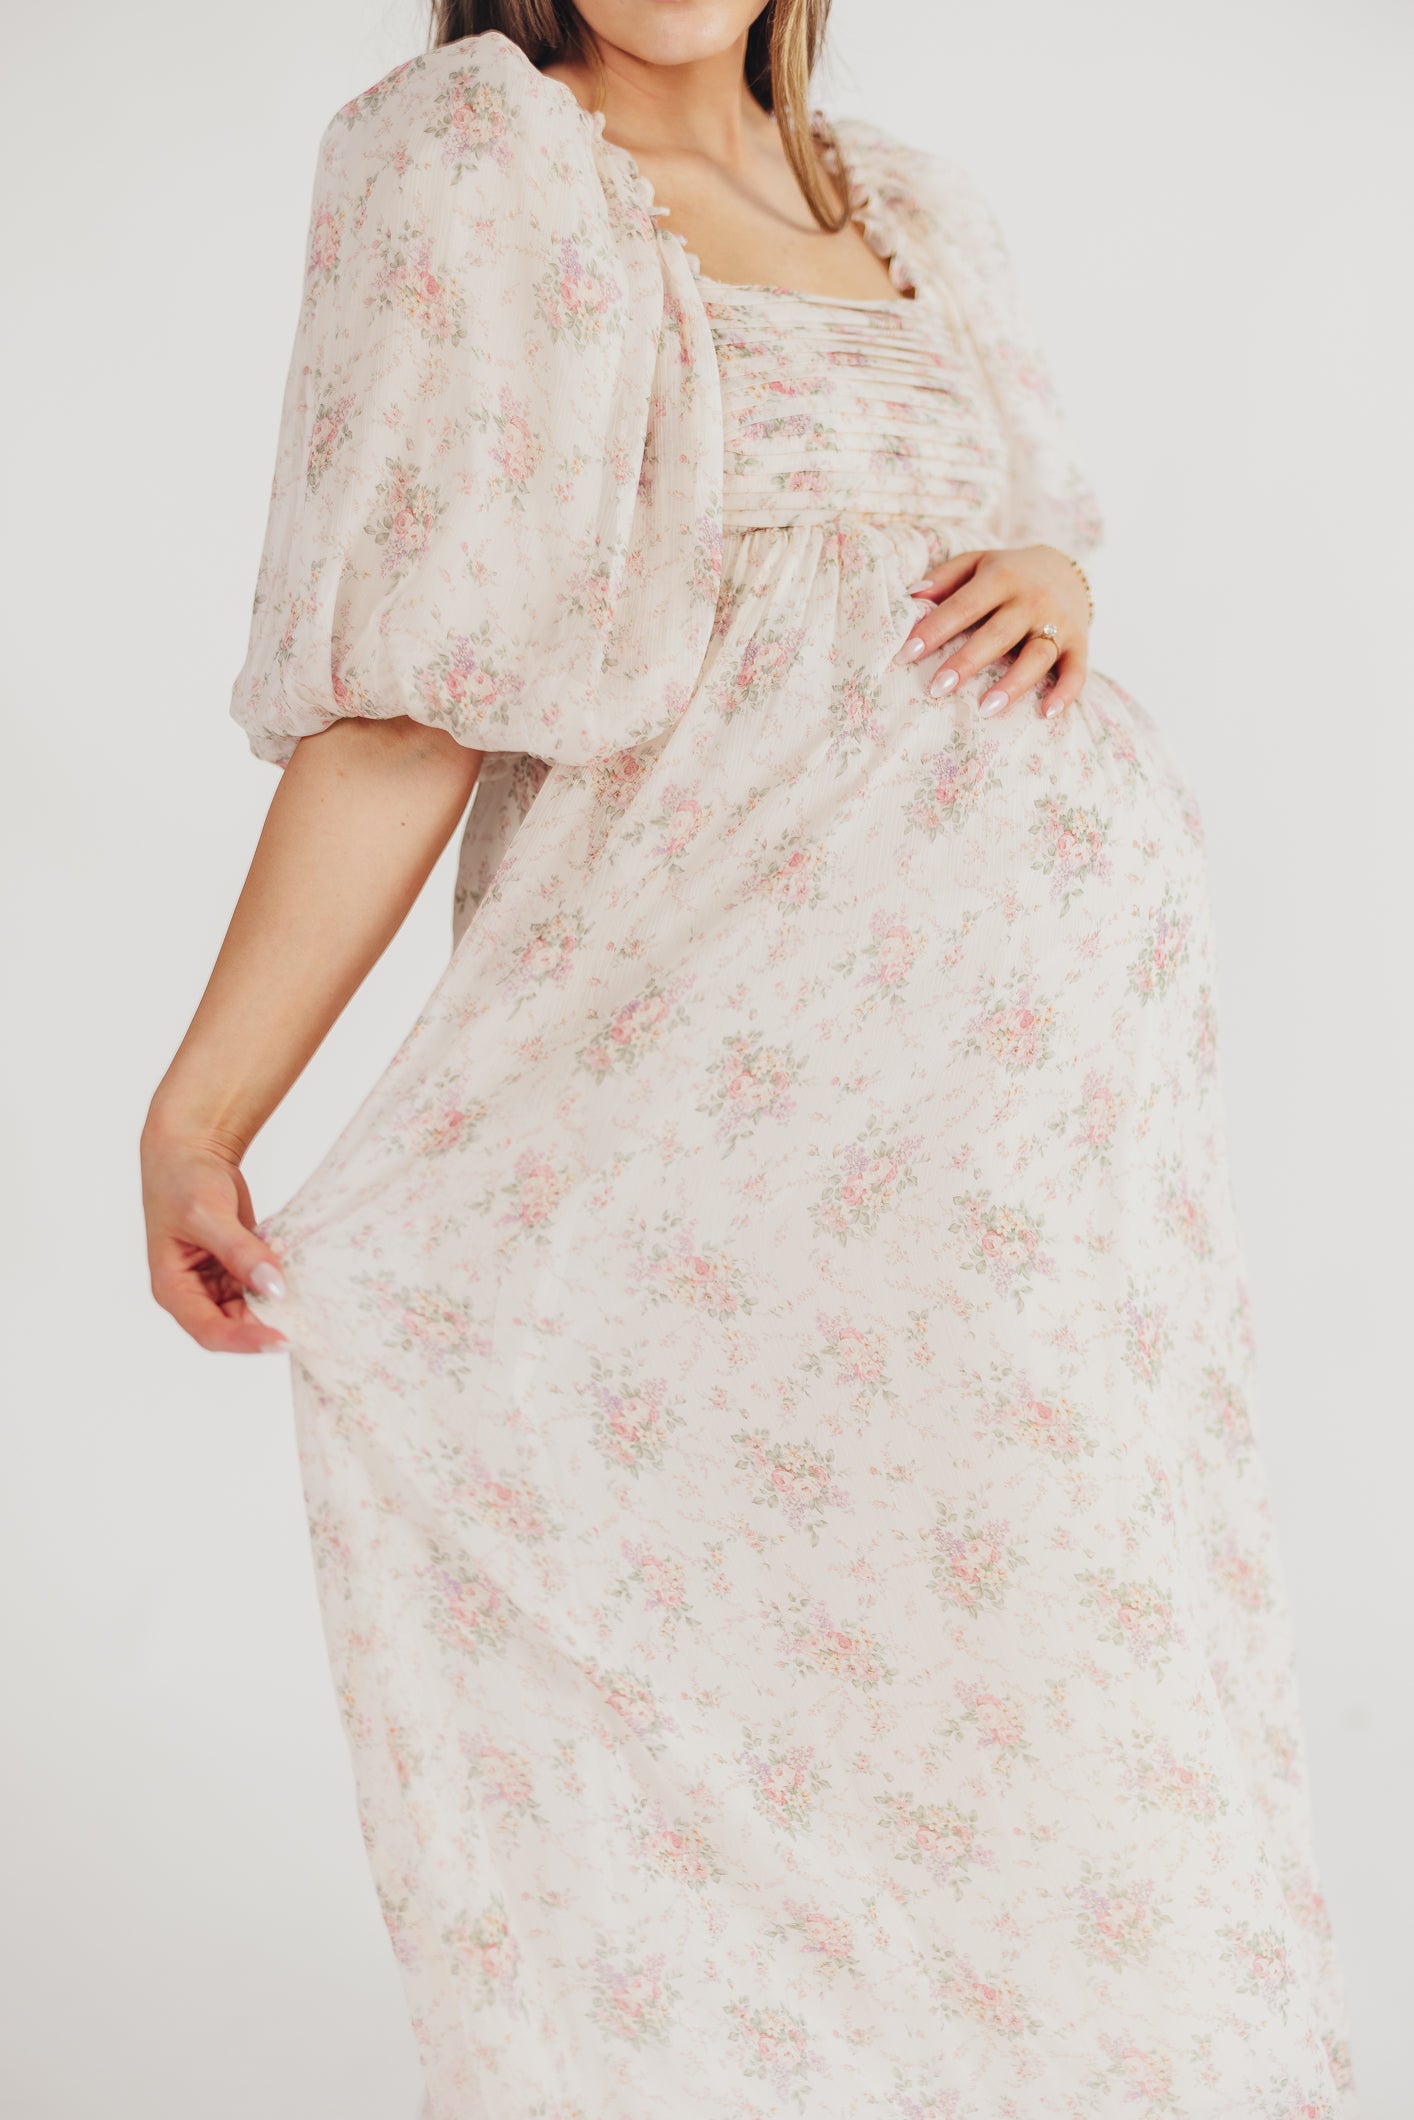 Melody Maxi Dress in Petal Pink - Bump Friendly & Inclusive Sizing (S-3XL)